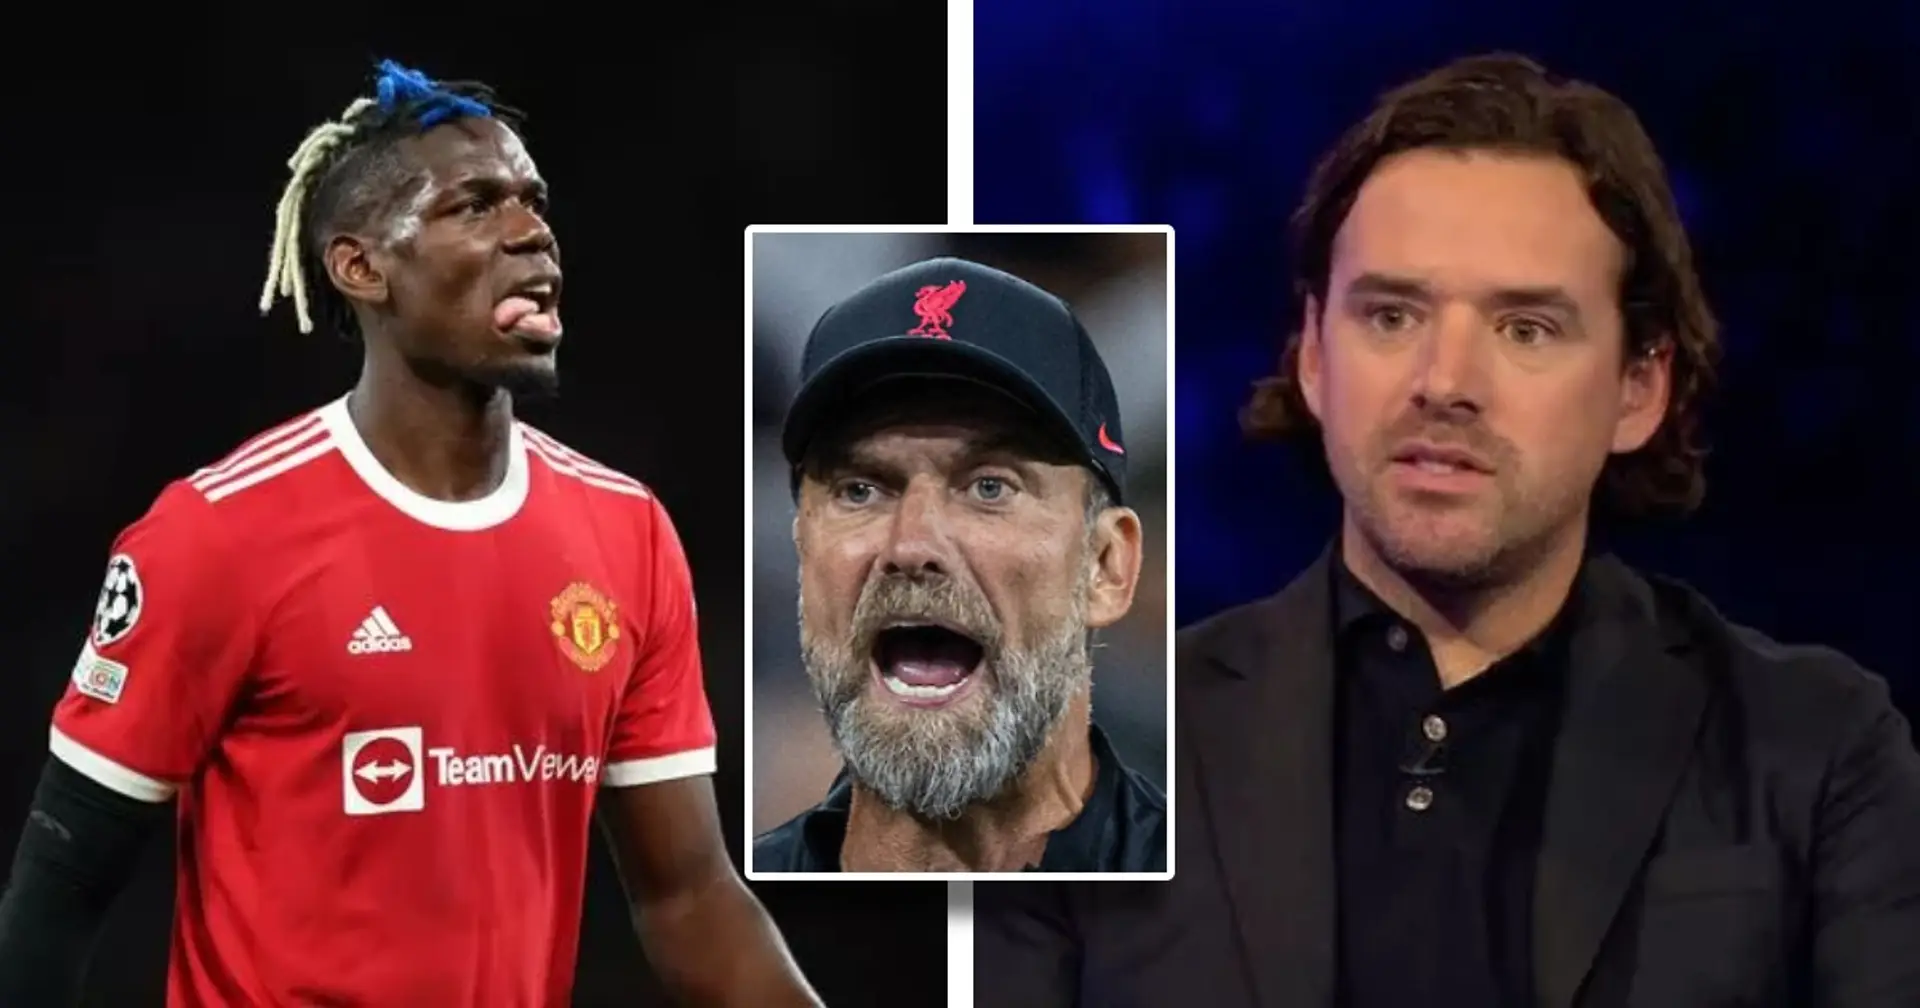 'Liverpool fans won't like this': Hargreaves likens new Reds midfielder to Man United flop Pogba